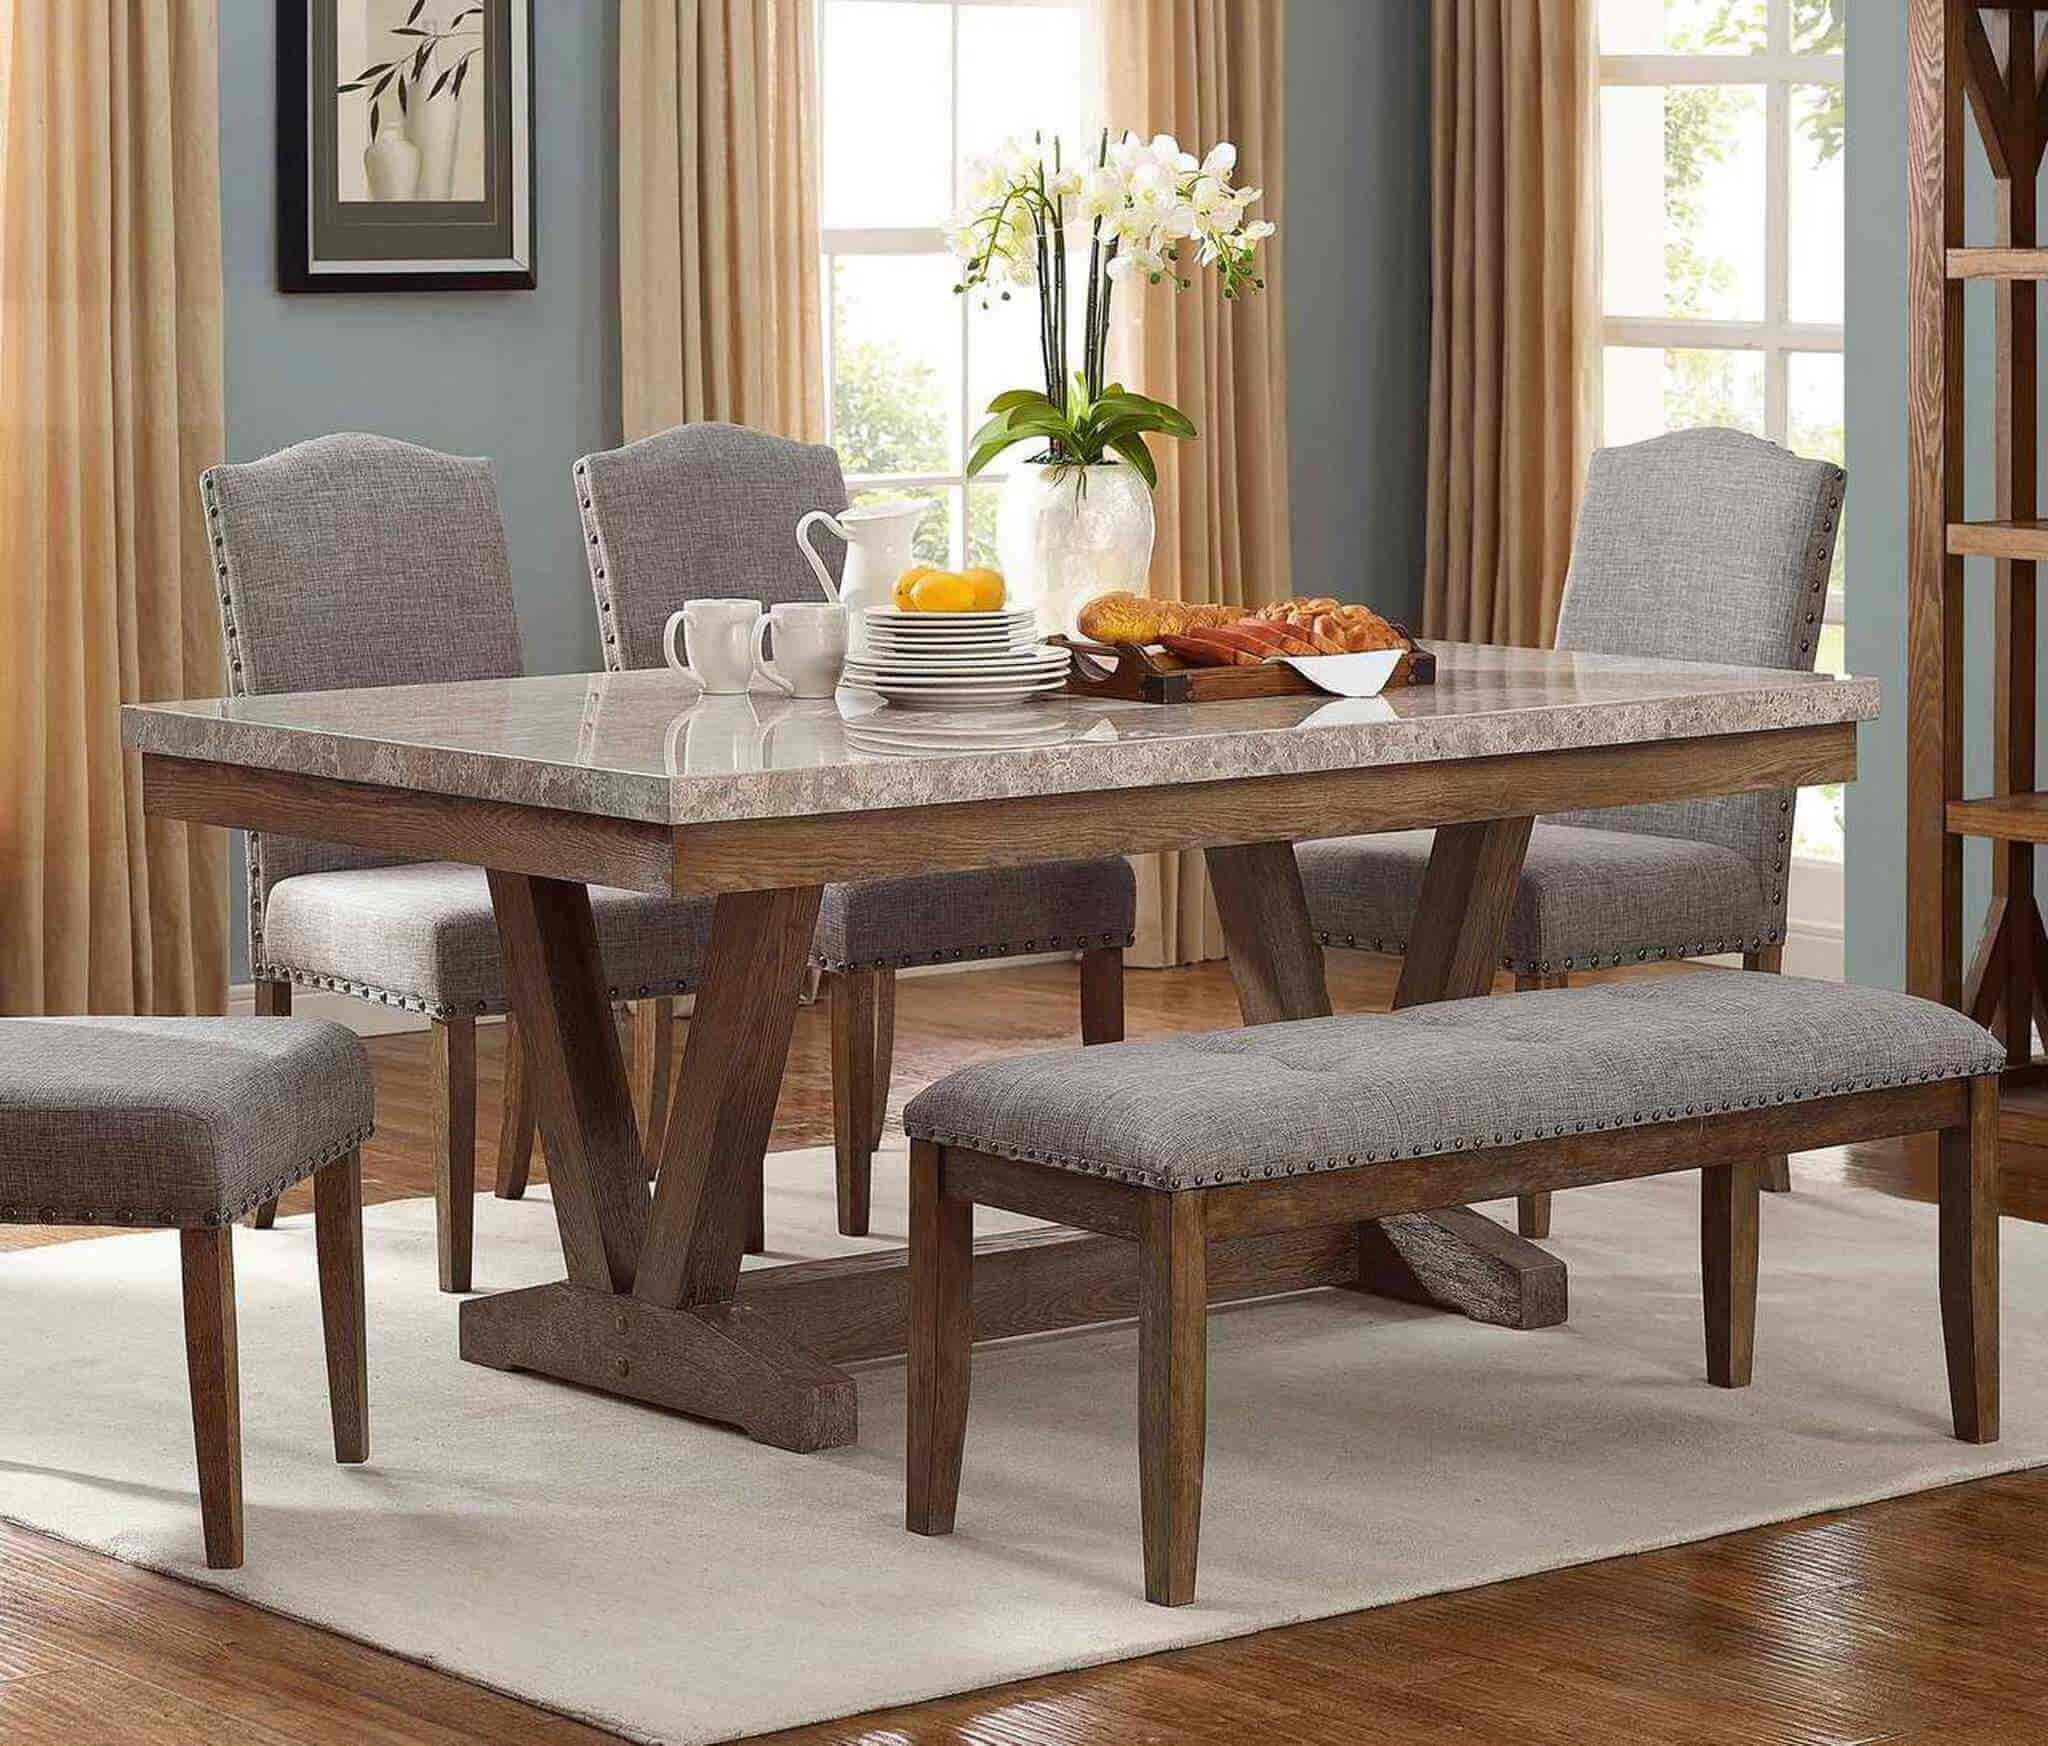 Tips to Get a Dining Table for Your House - Live Enhanced